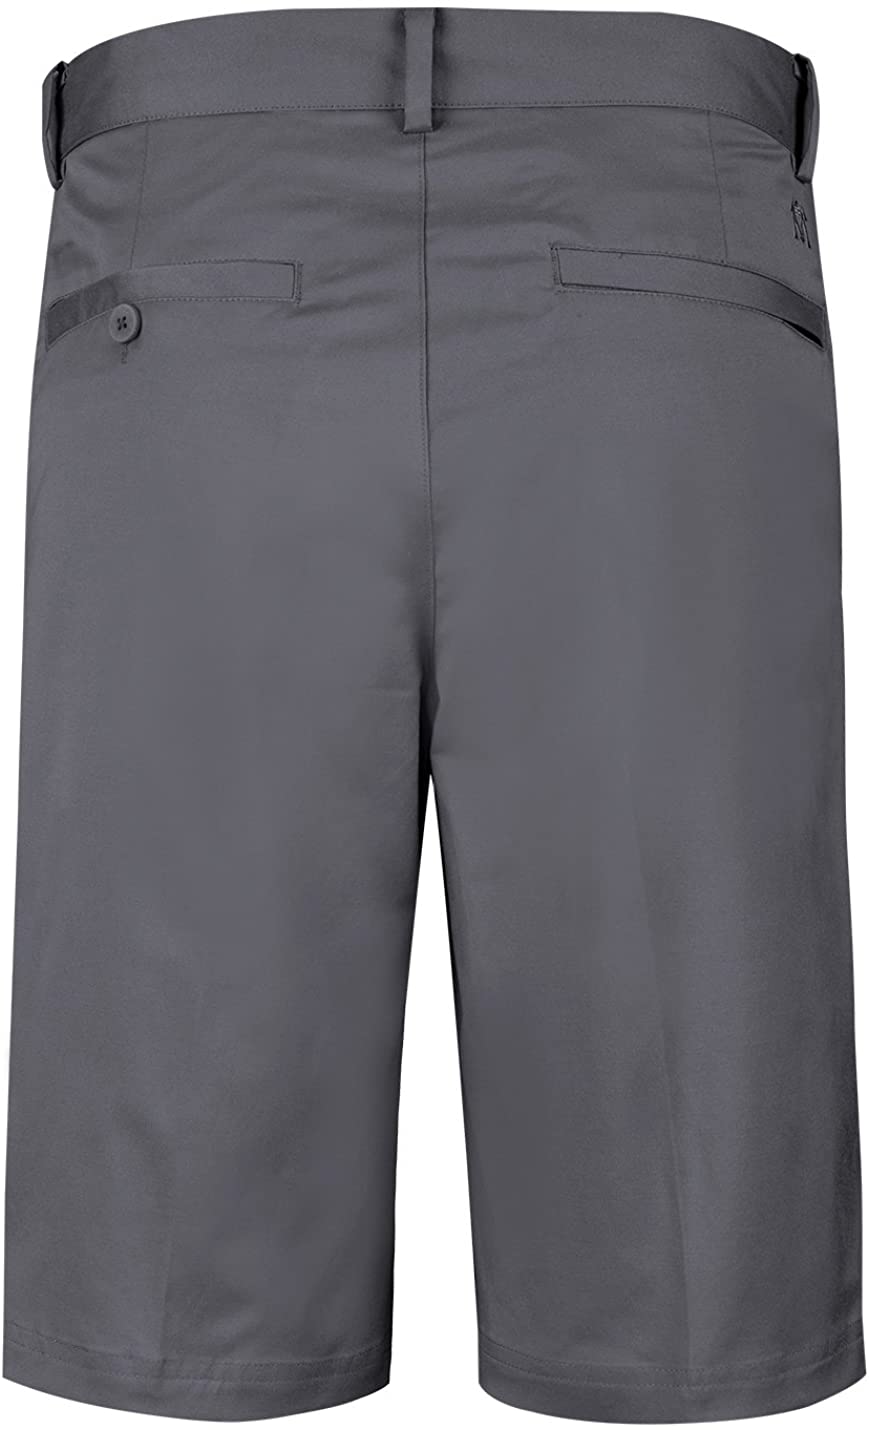 Lesmart Men's Golf Shorts Stretch Quick Dry Relaxed Fit Tech, Grey ...